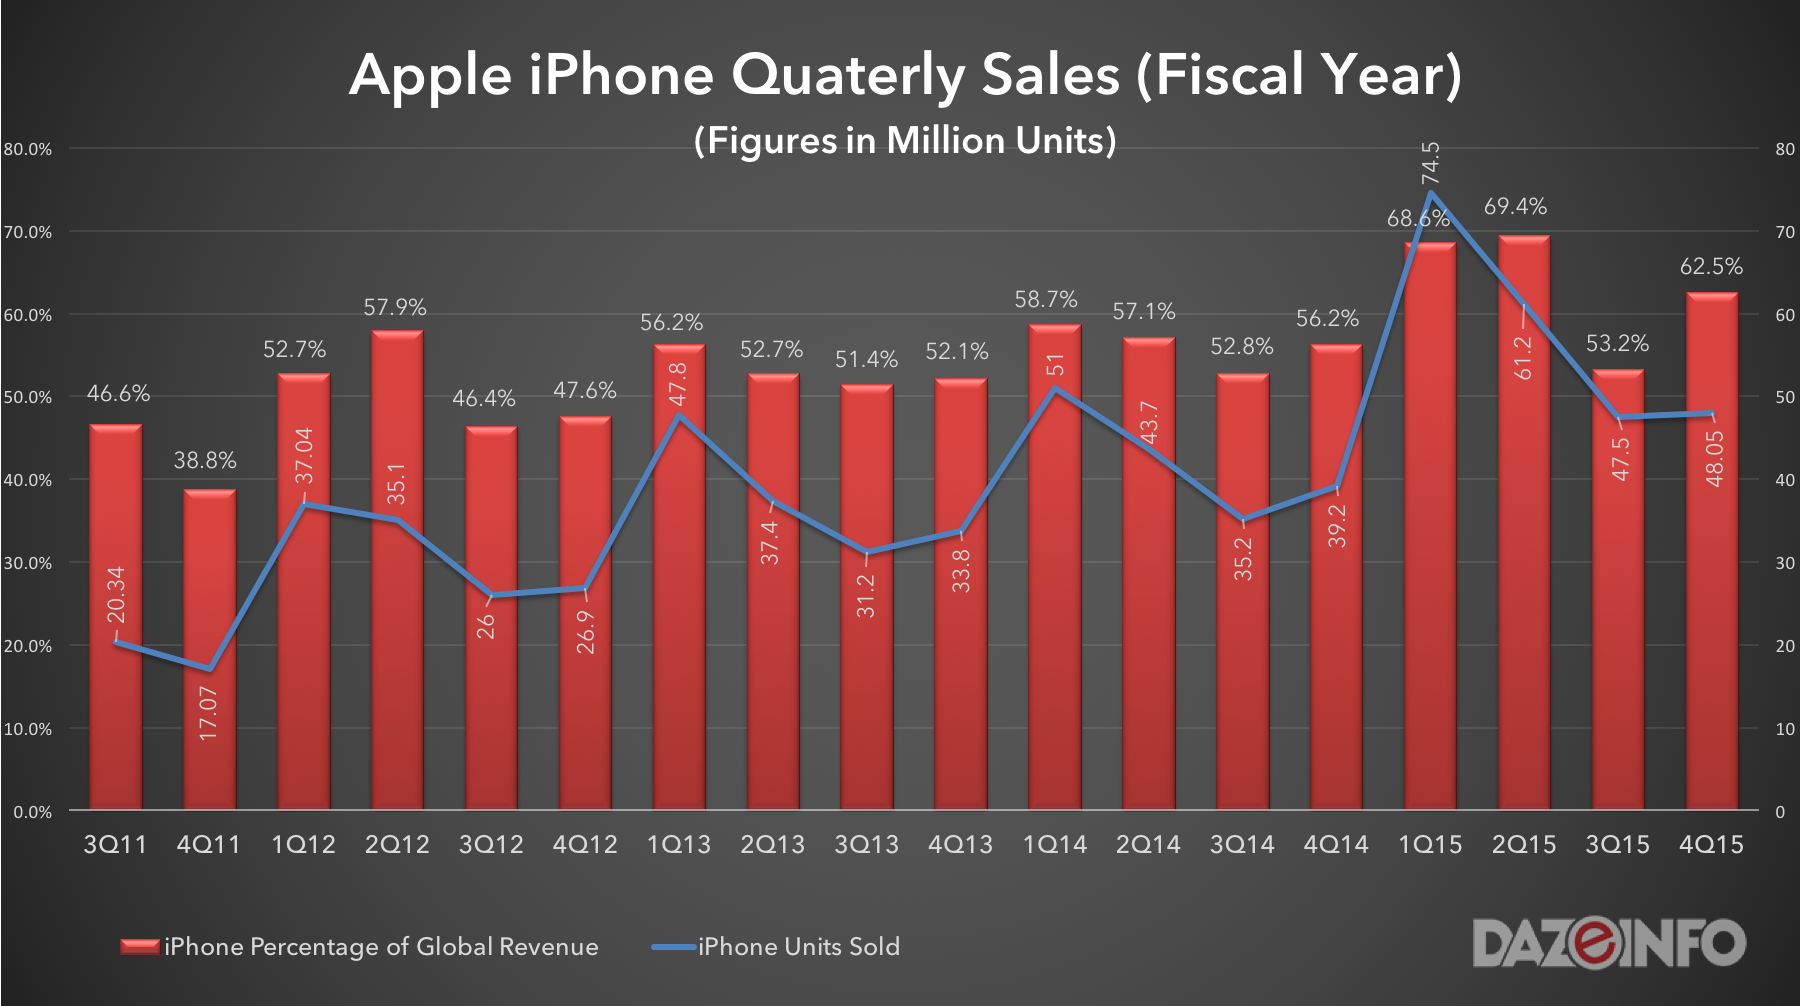 Apple iPhone sales and revenue by quarter 2015